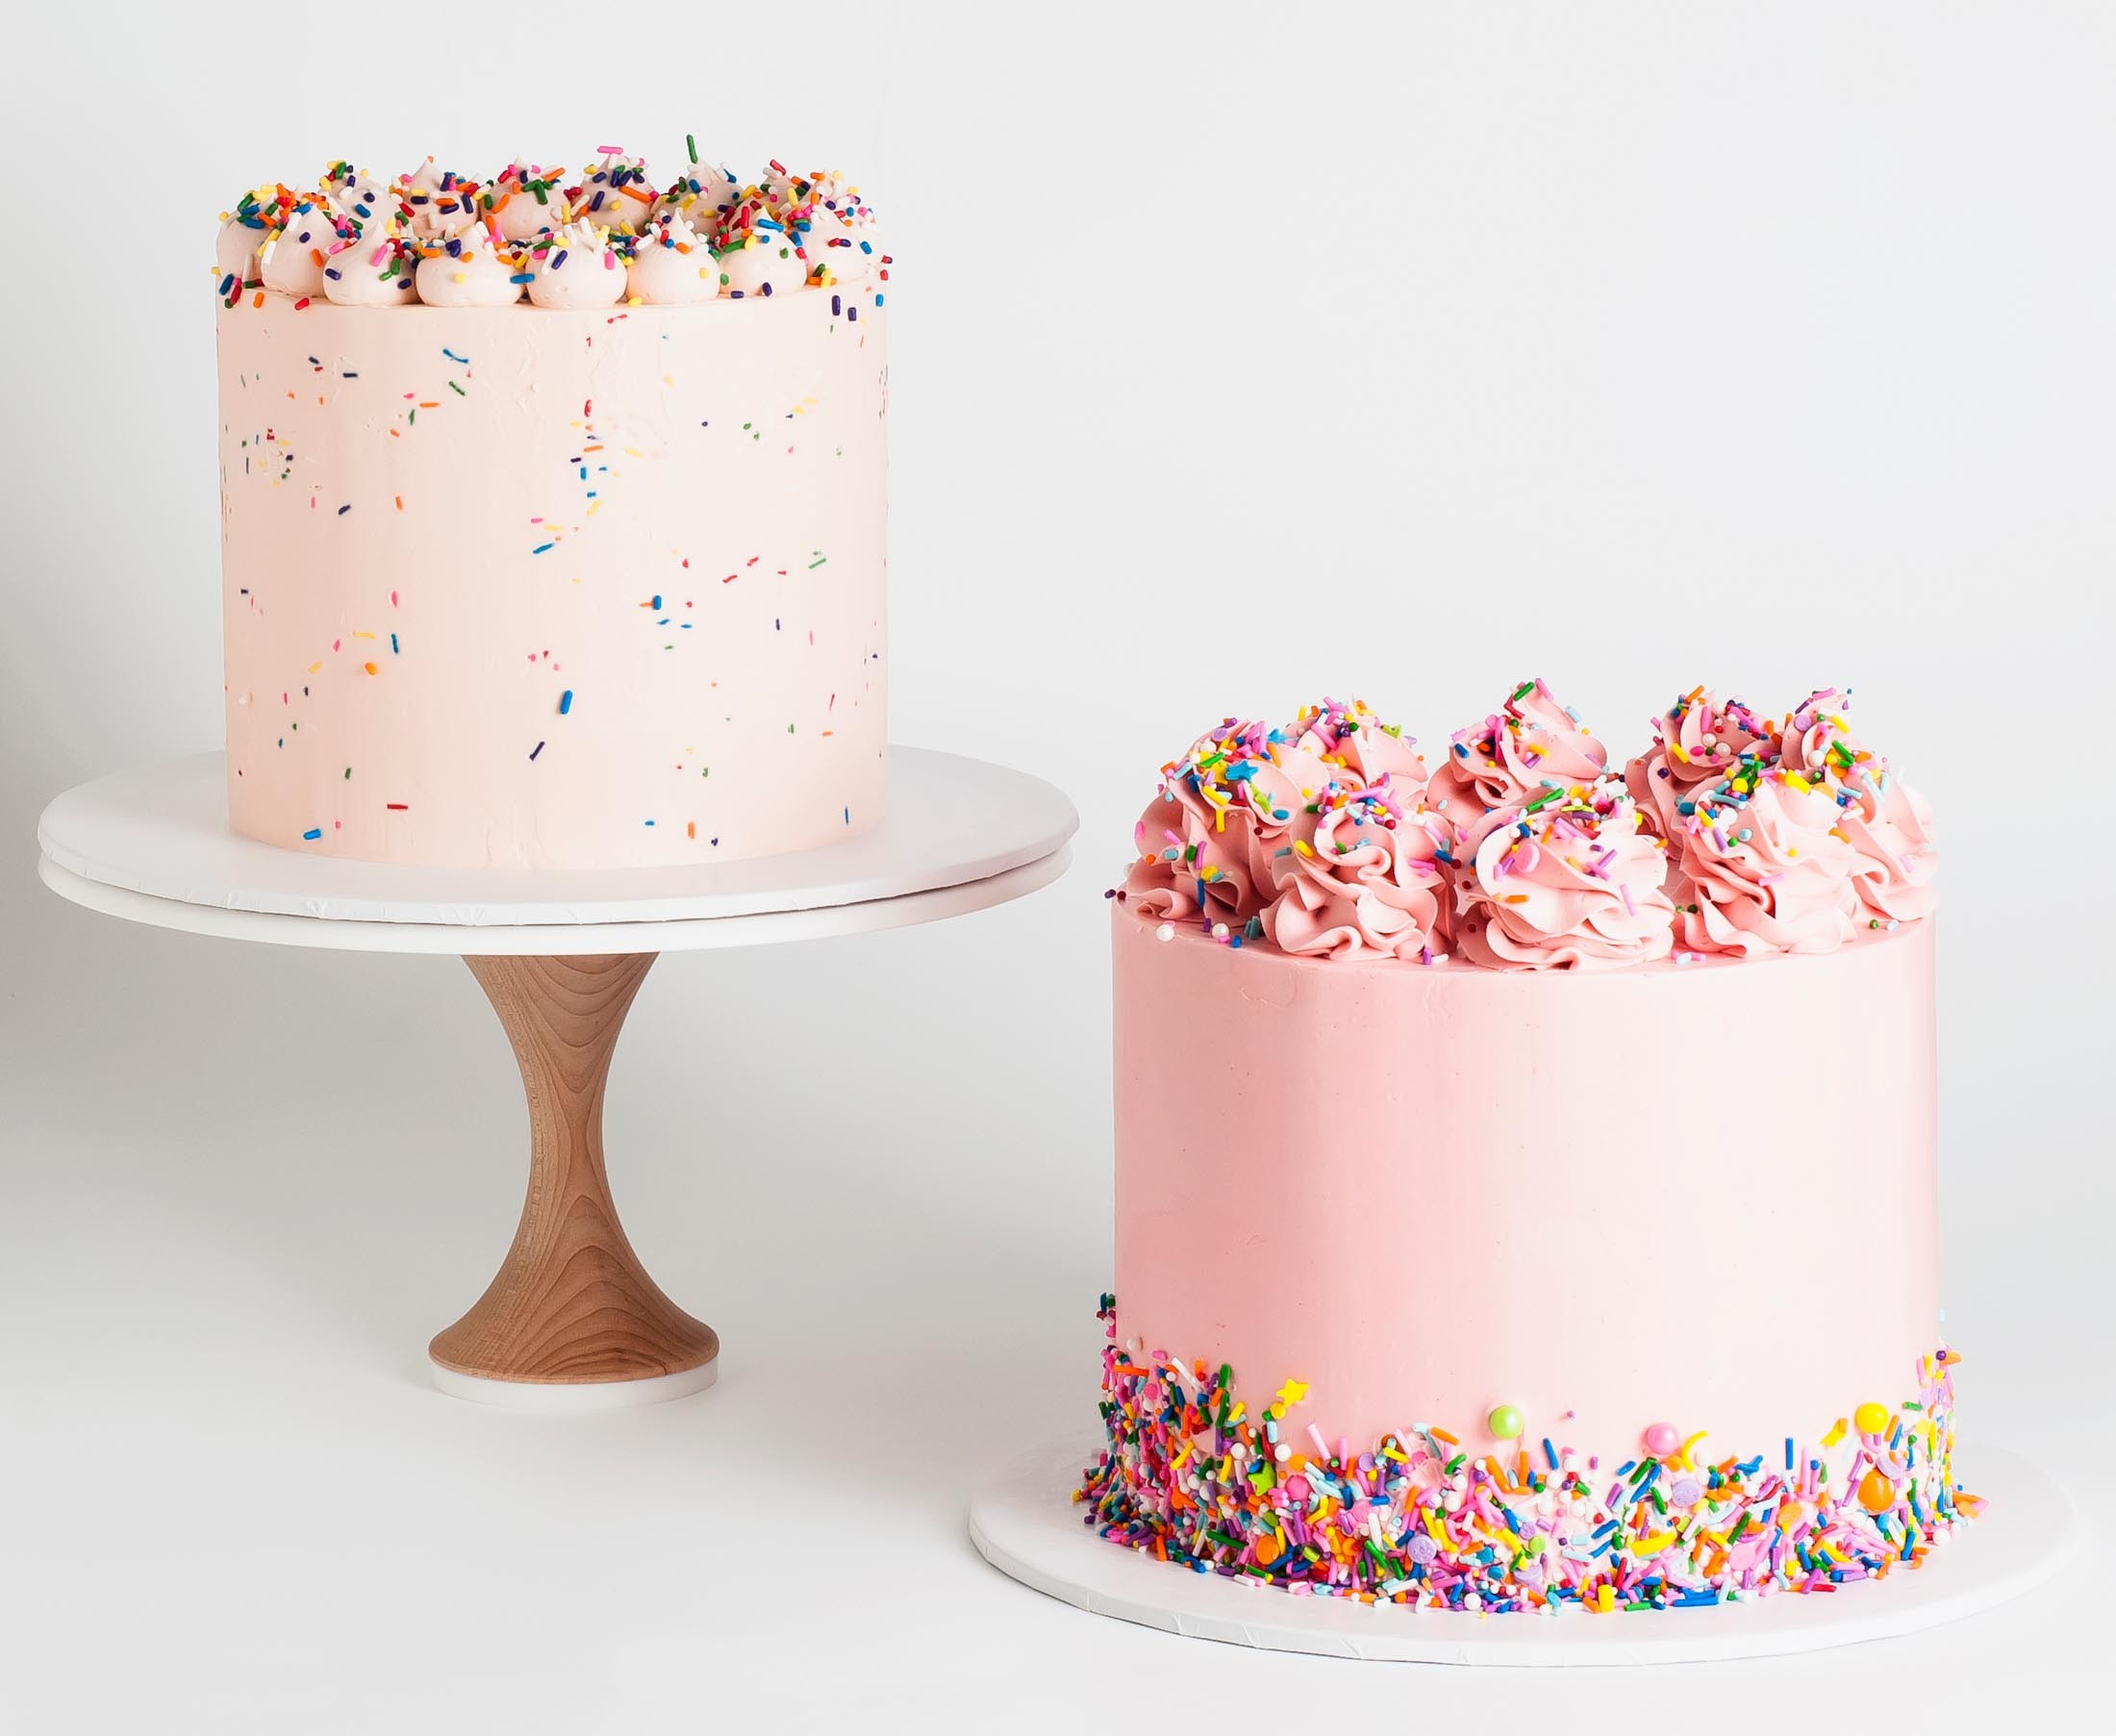 A Picture Of A Birthday Cake
 Sprinkle birthday cake